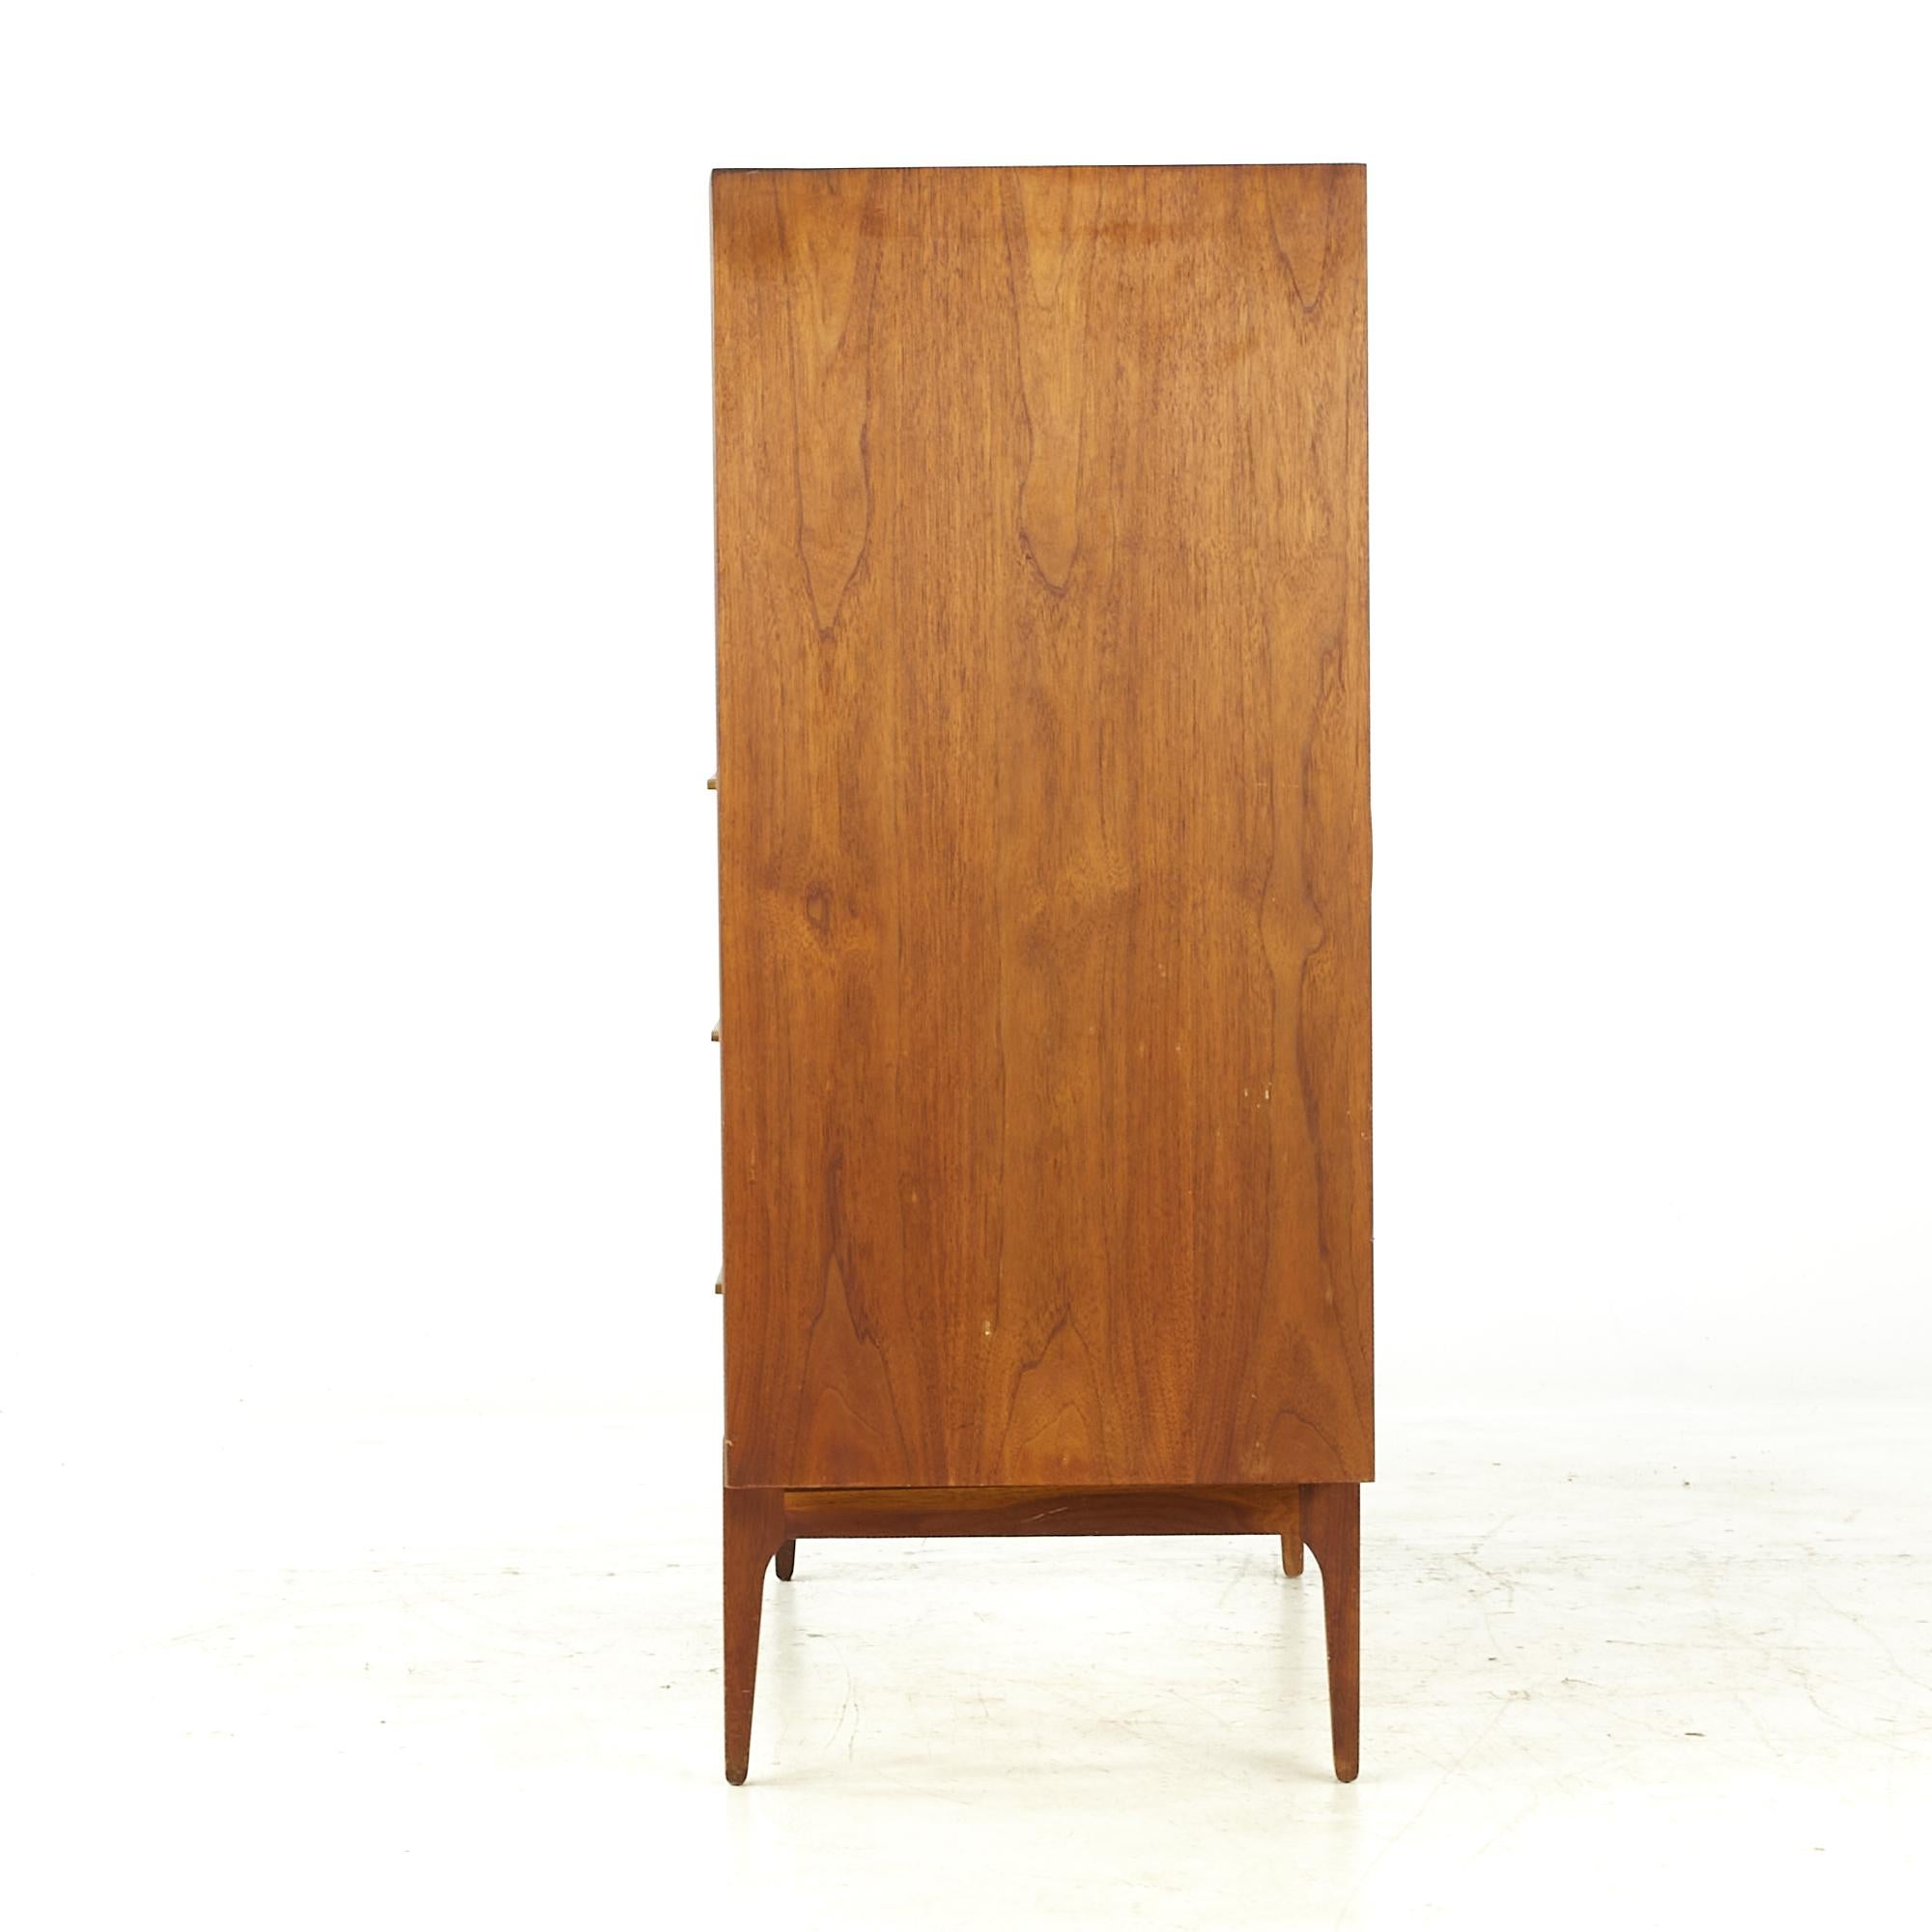 Jack Cartwright Style Ramseur Midcentury Walnut and Brass Highboy Dresser In Good Condition For Sale In Countryside, IL